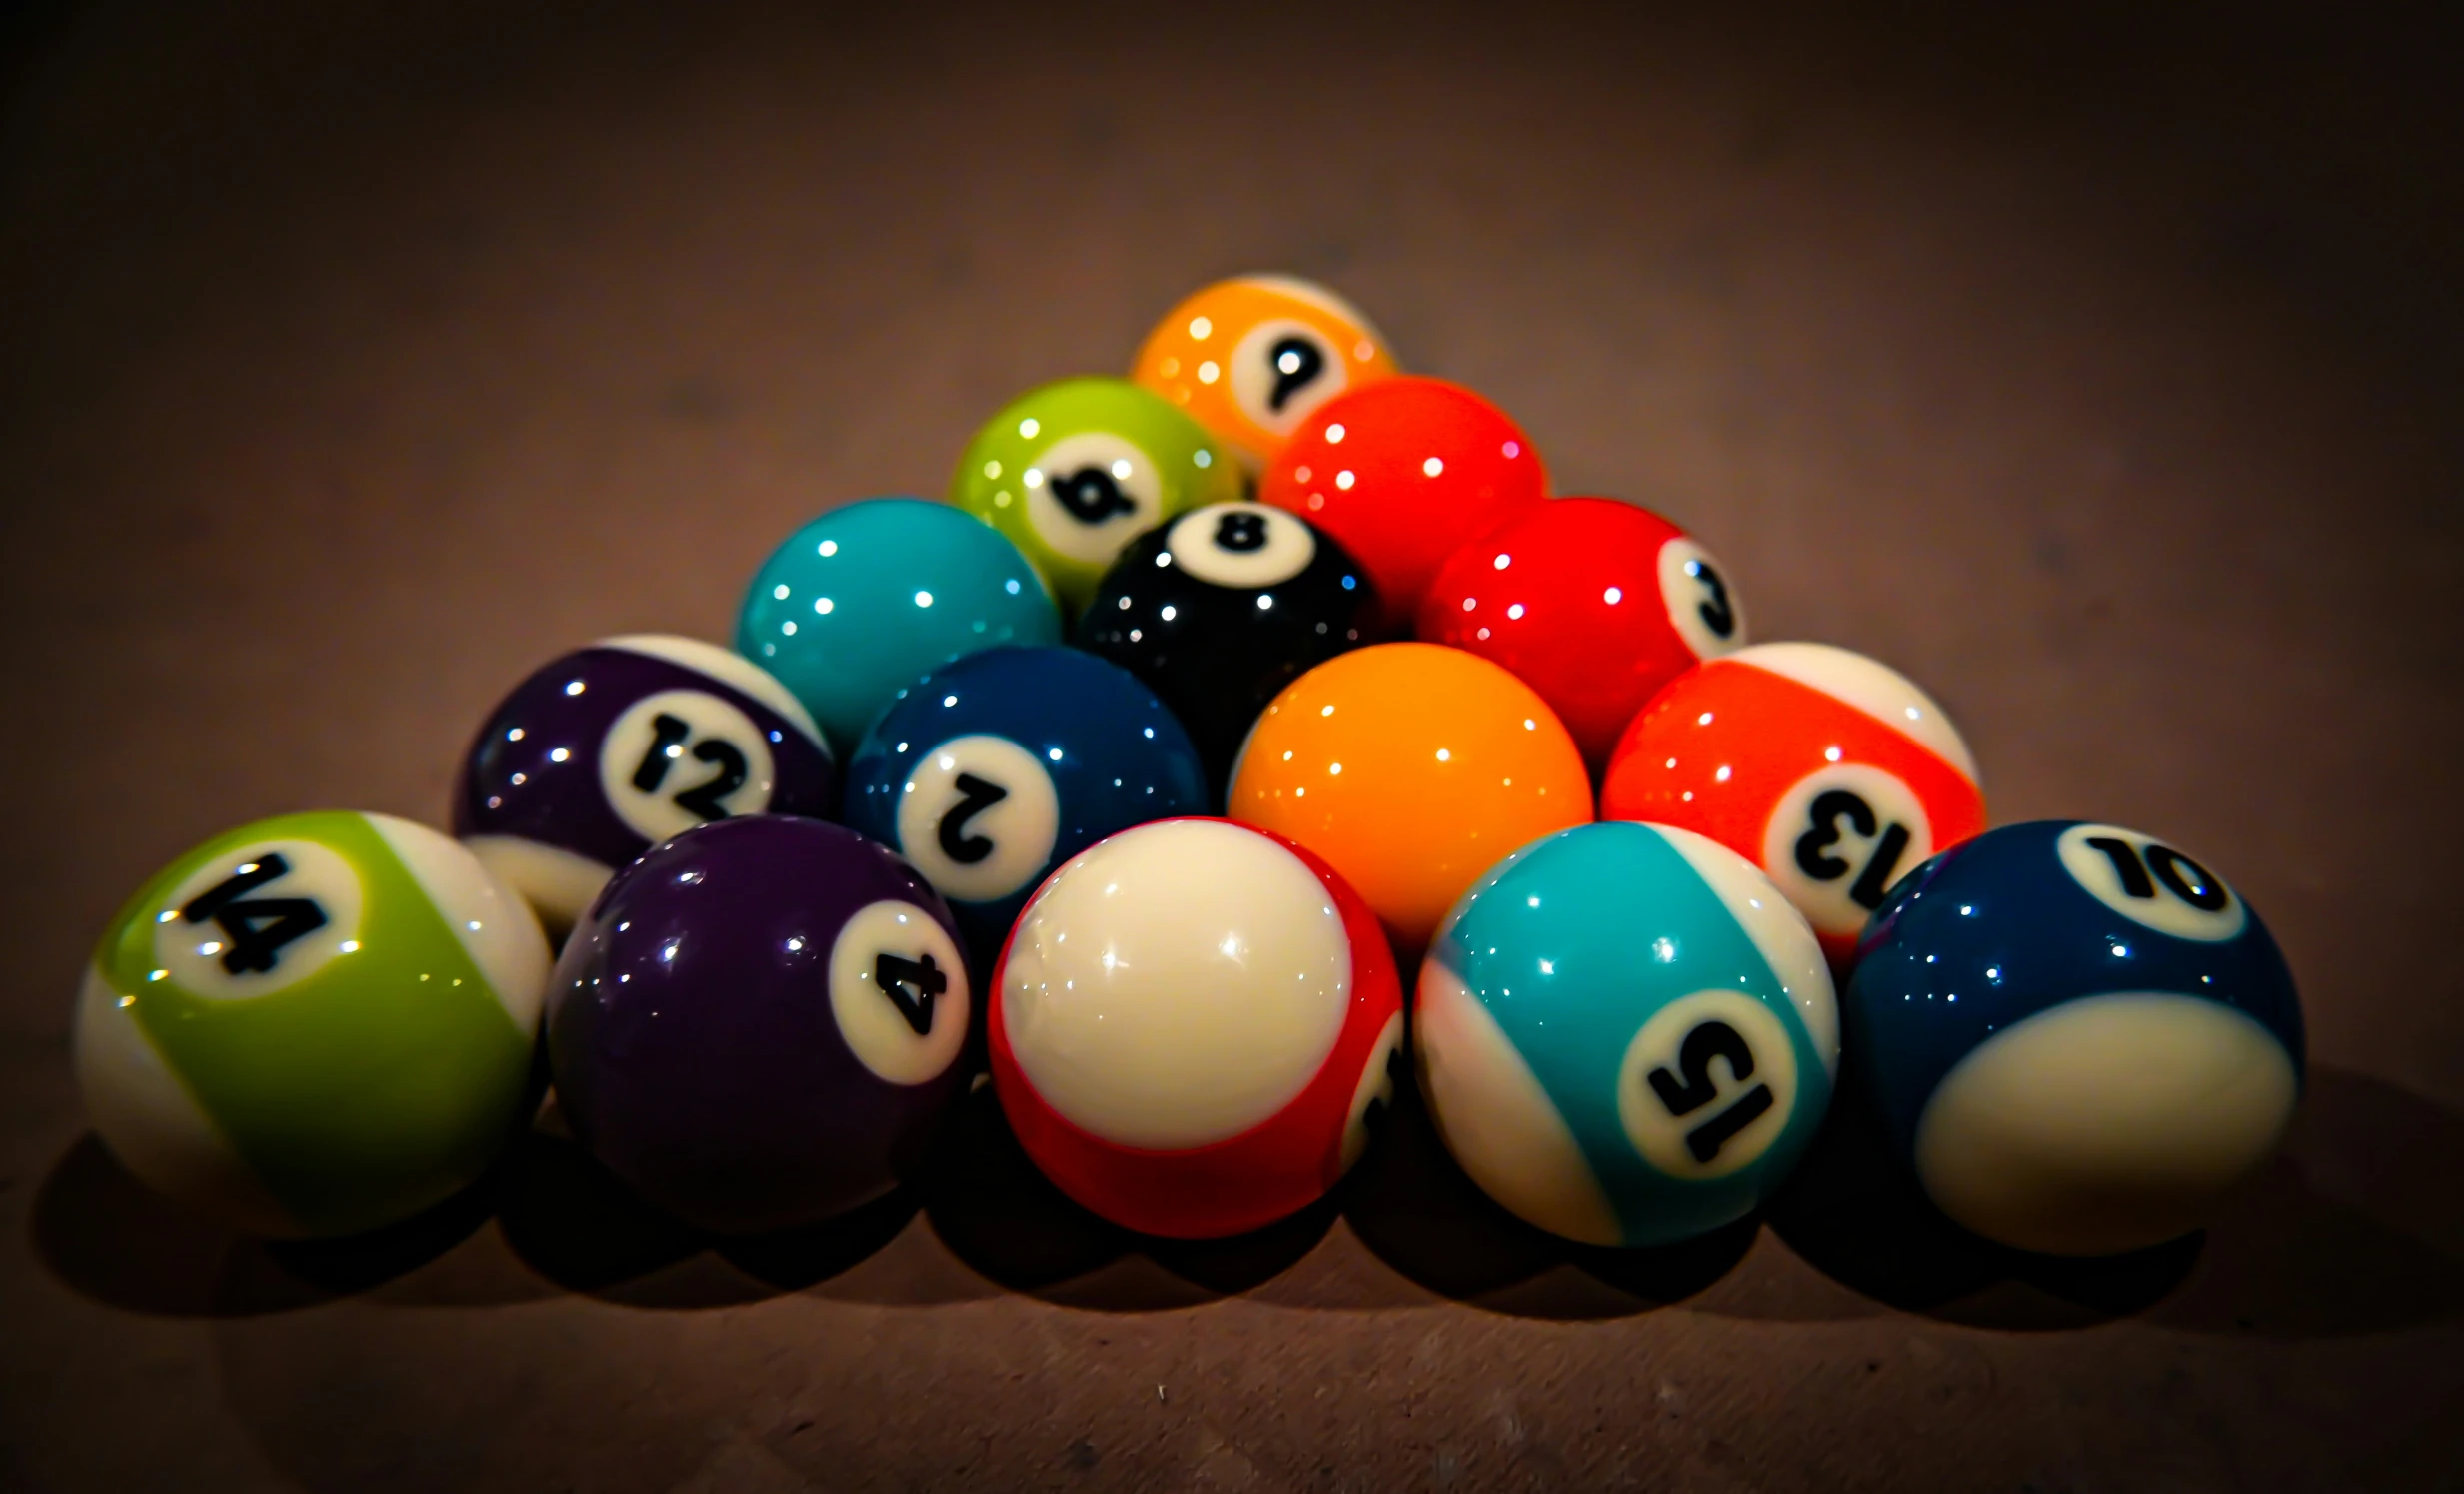 eight ball pool game arranged in various stages